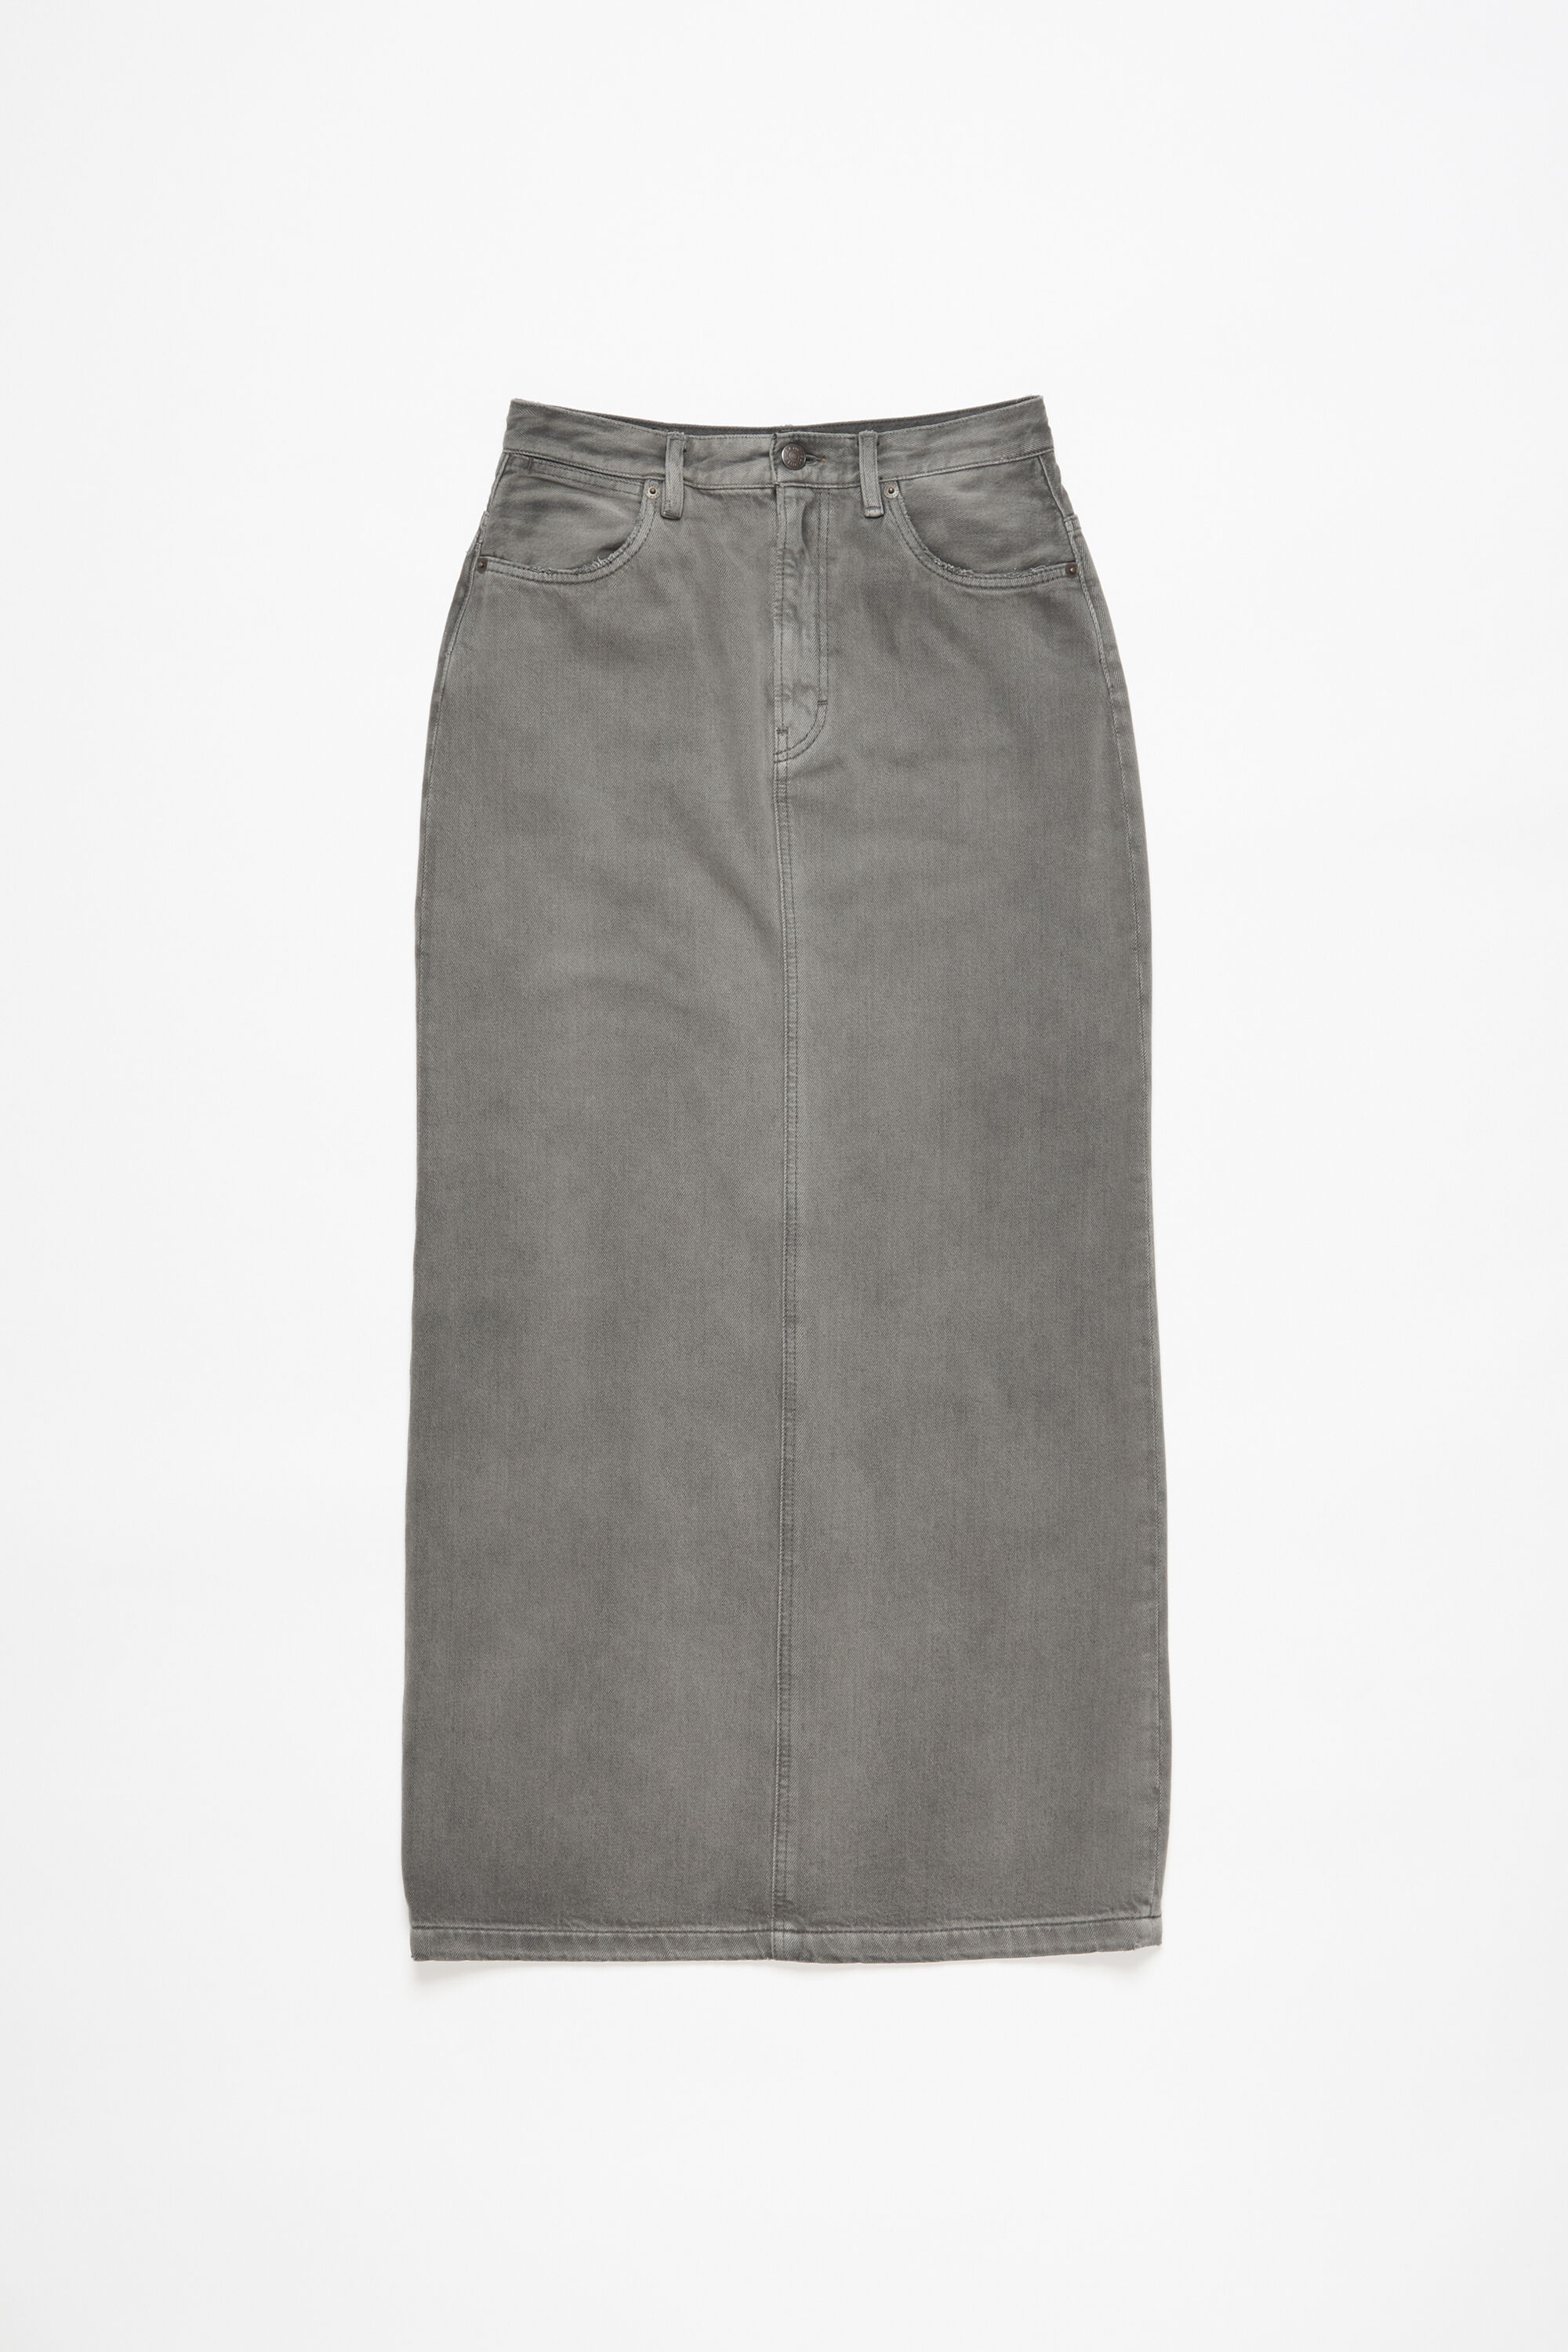 Pilcro Coated Denim Pencil Skirt | Anthropologie Japan - Women's Clothing,  Accessories & Home